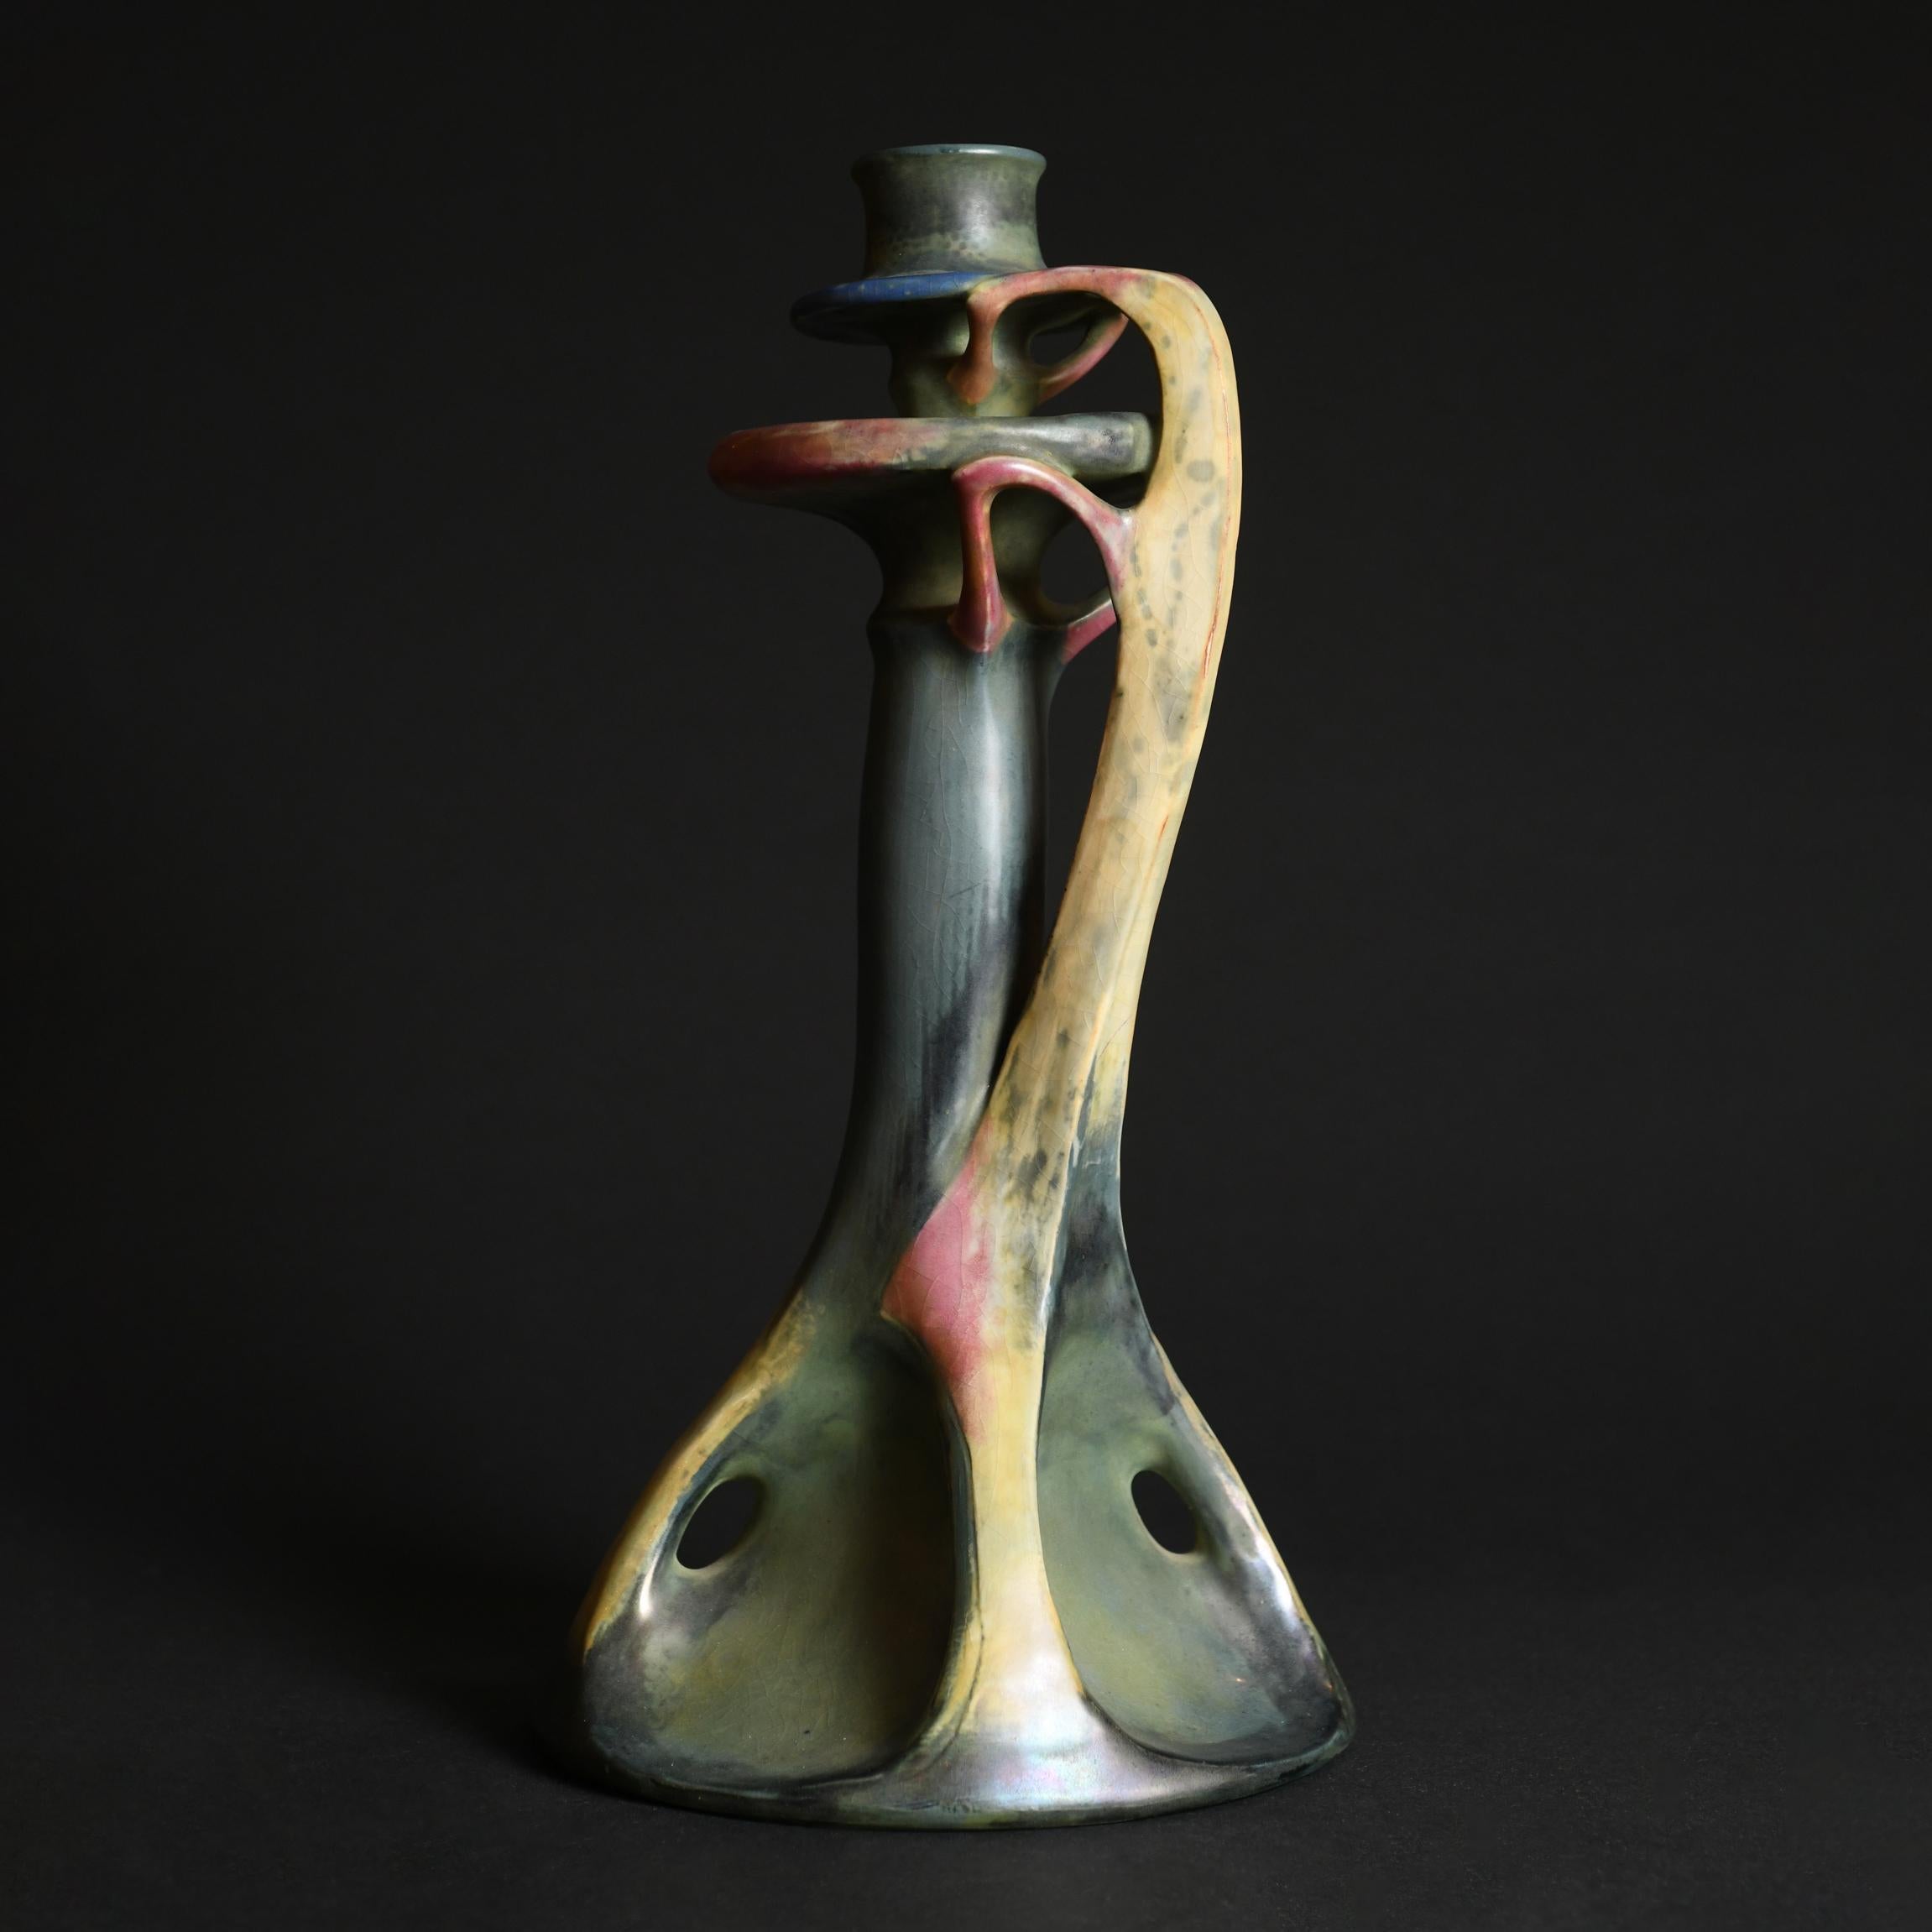 Amphora: Begun in 1892 in Turn, Bohemia as a manufacturer of artistic porcelain, Amphora was the result of a partnership between members of an extended family, Riessner, Stellmacher and Kessel. The firm quickly rose in prominence and, by 1896, it